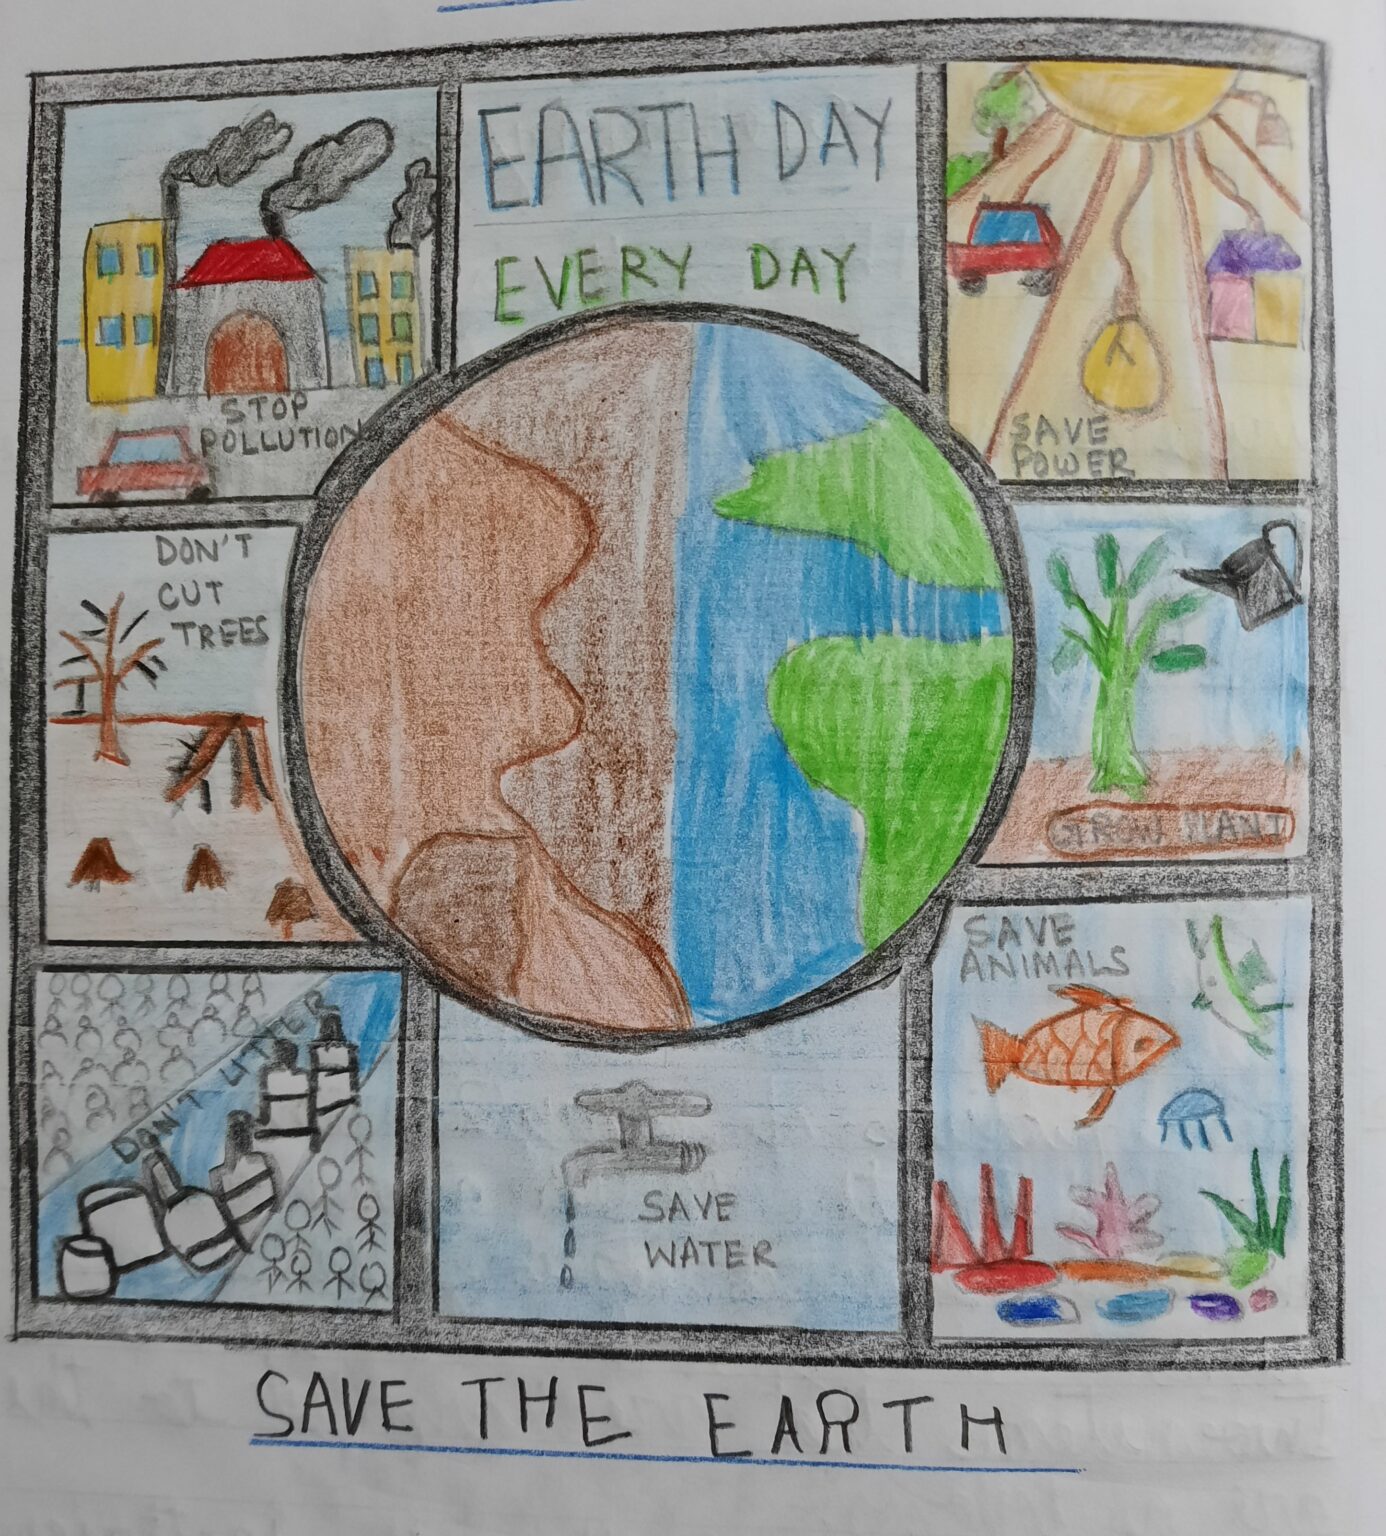 My message for Earth day